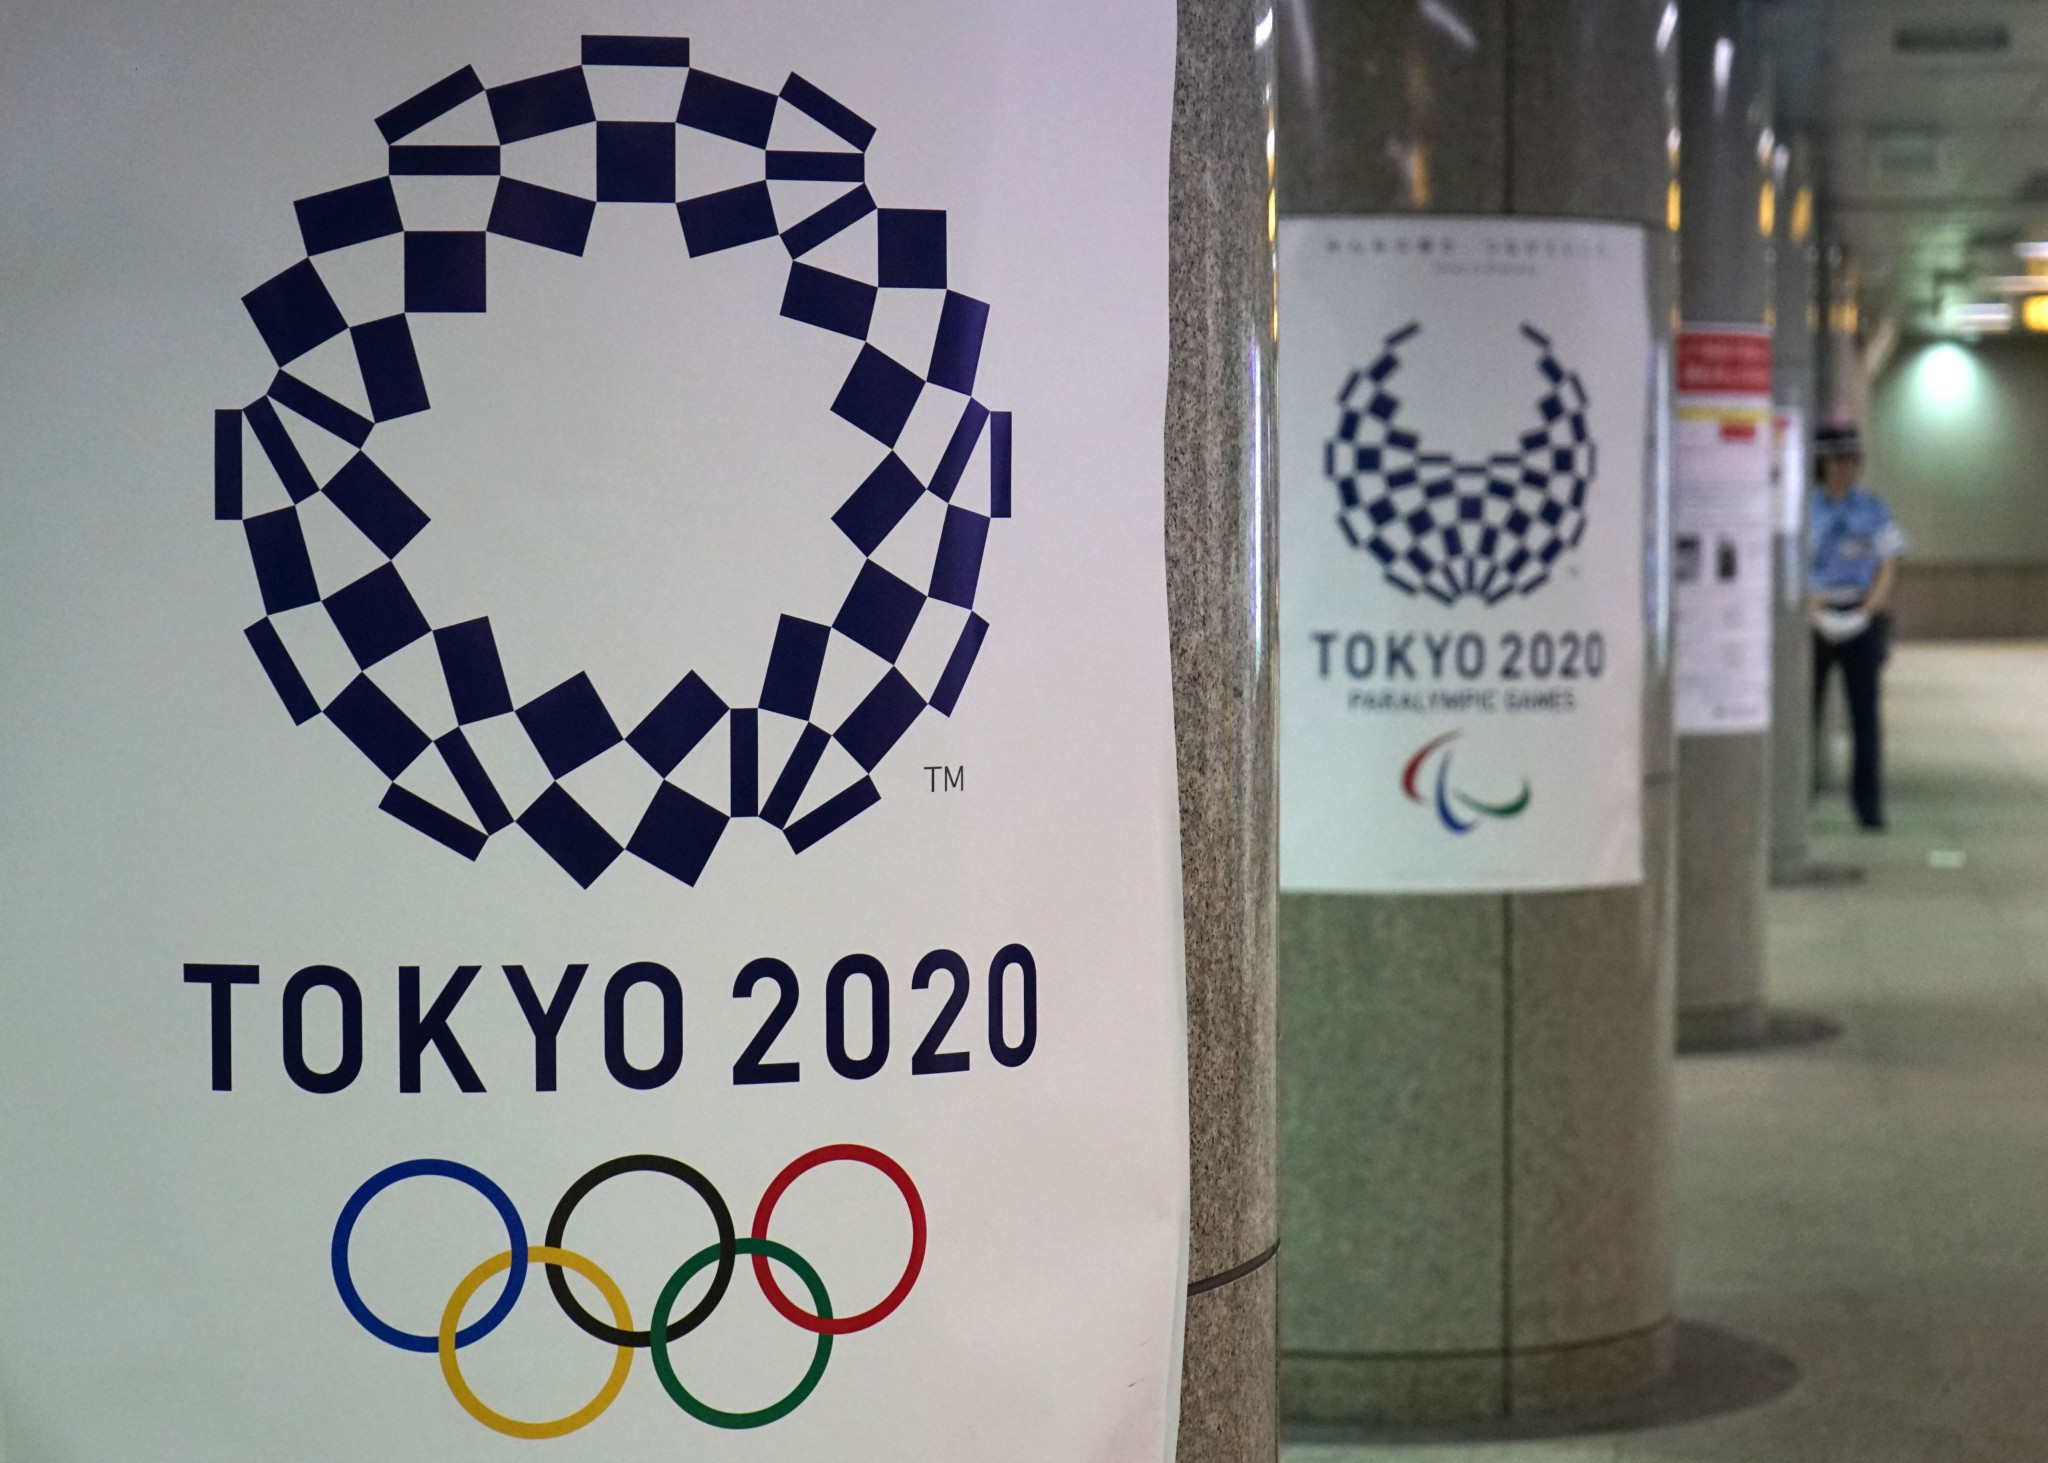 Only one in five 17-to 19-year-olds in Japan have applied for tickets to the Tokyo 2020 Olympics ©Getty Images